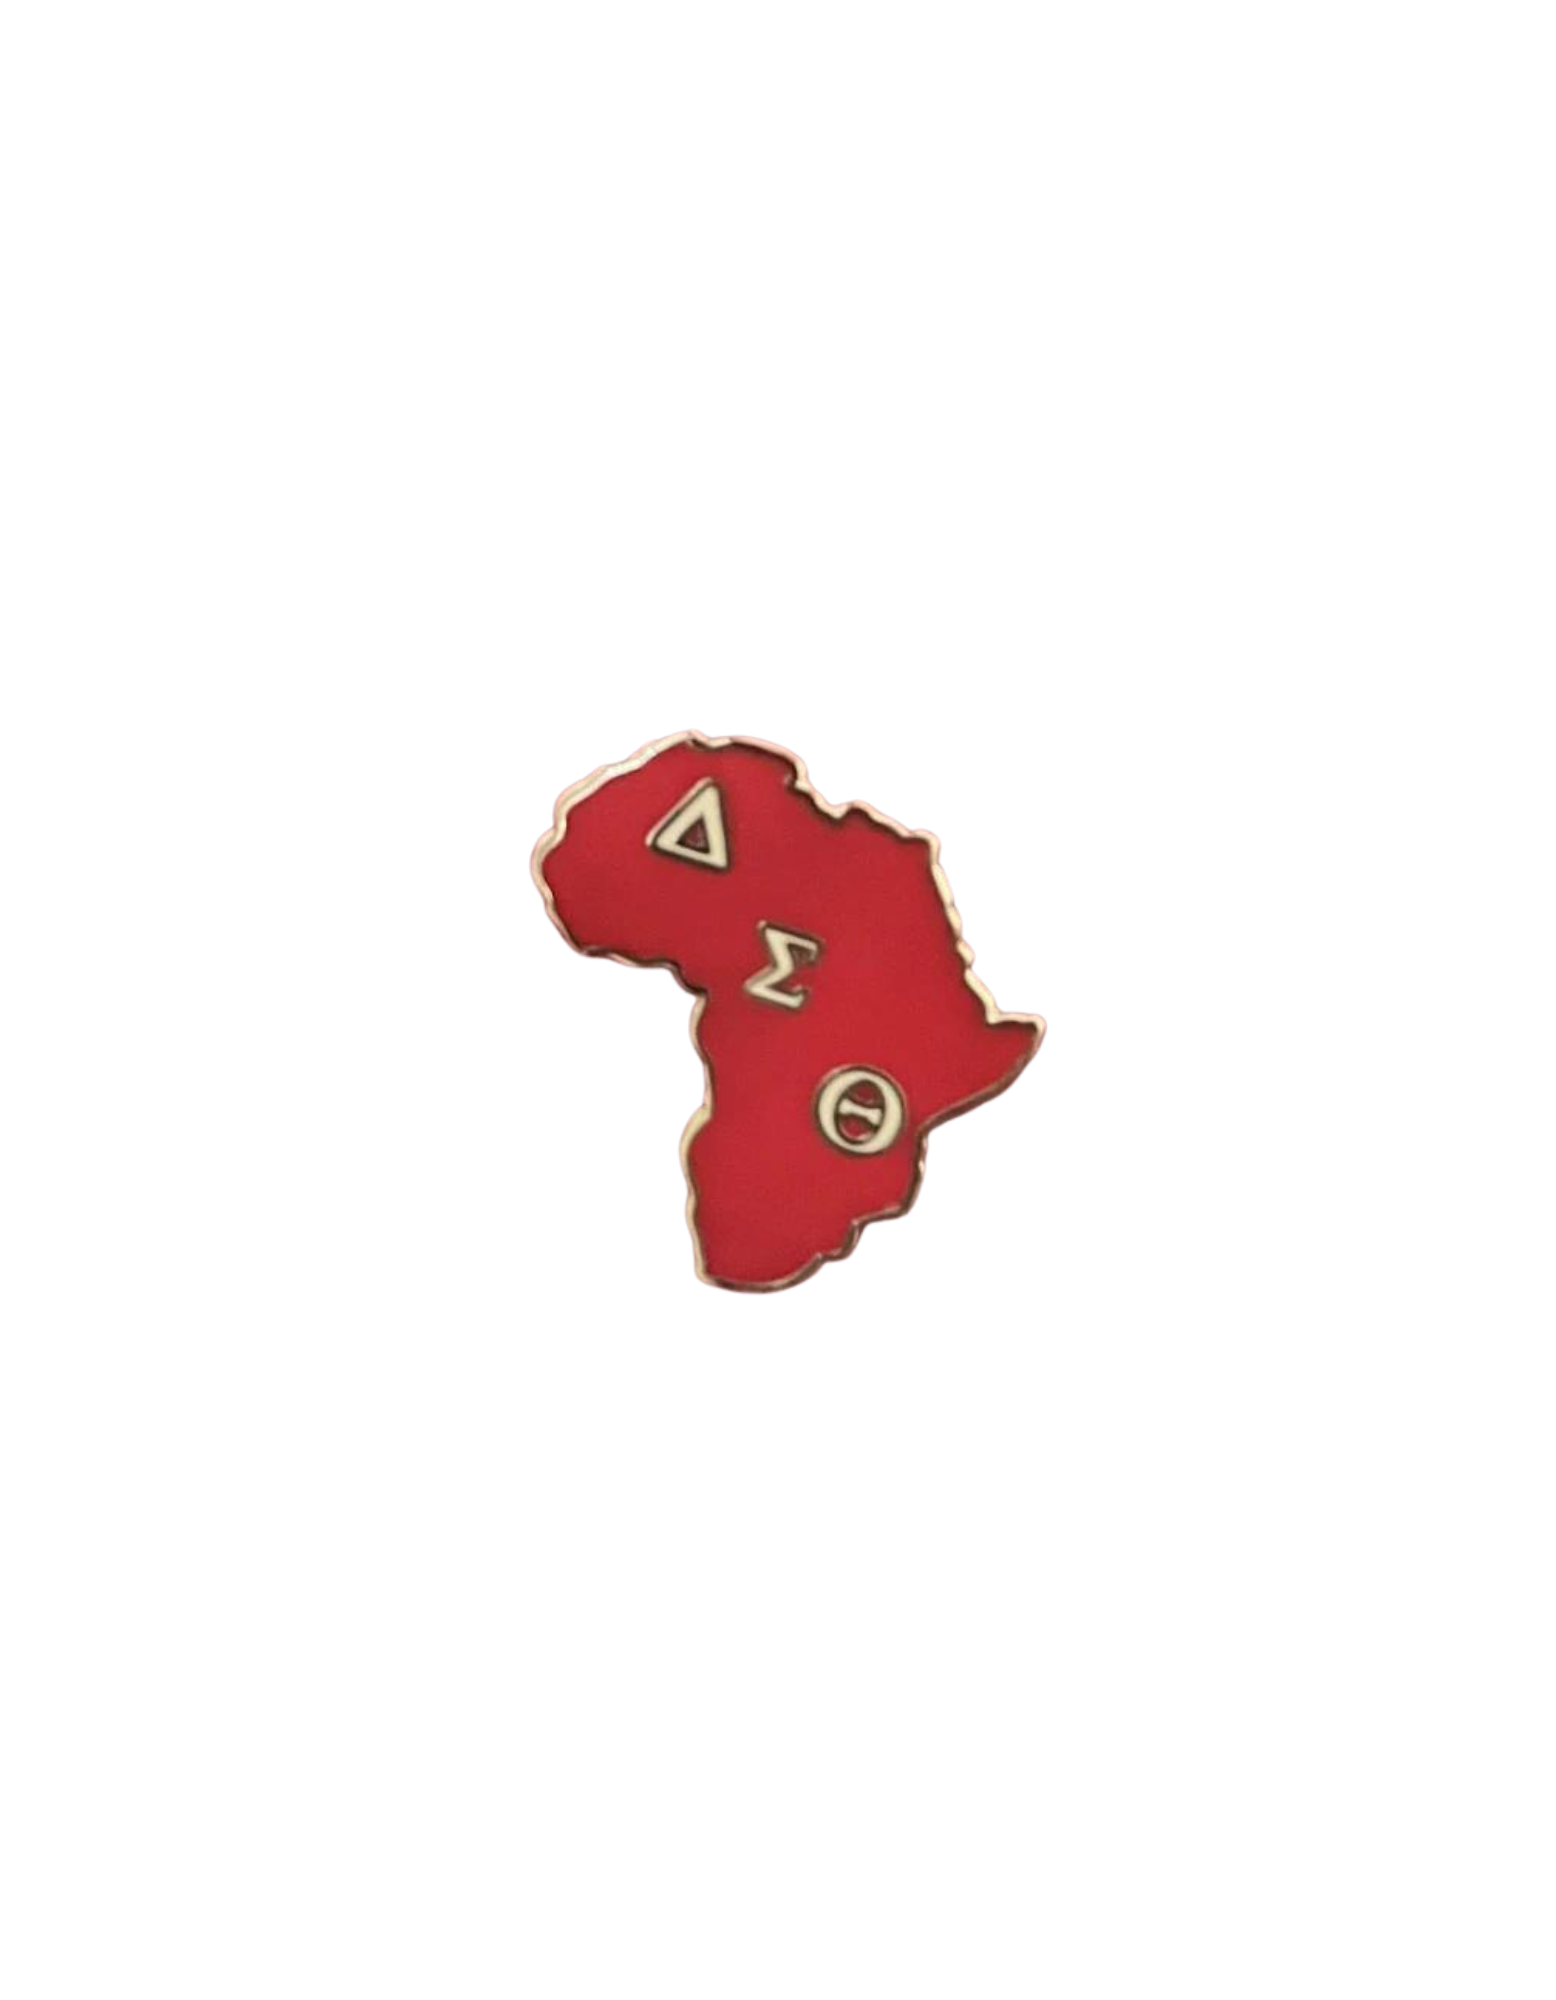 DST 1” Africa Lapel pin